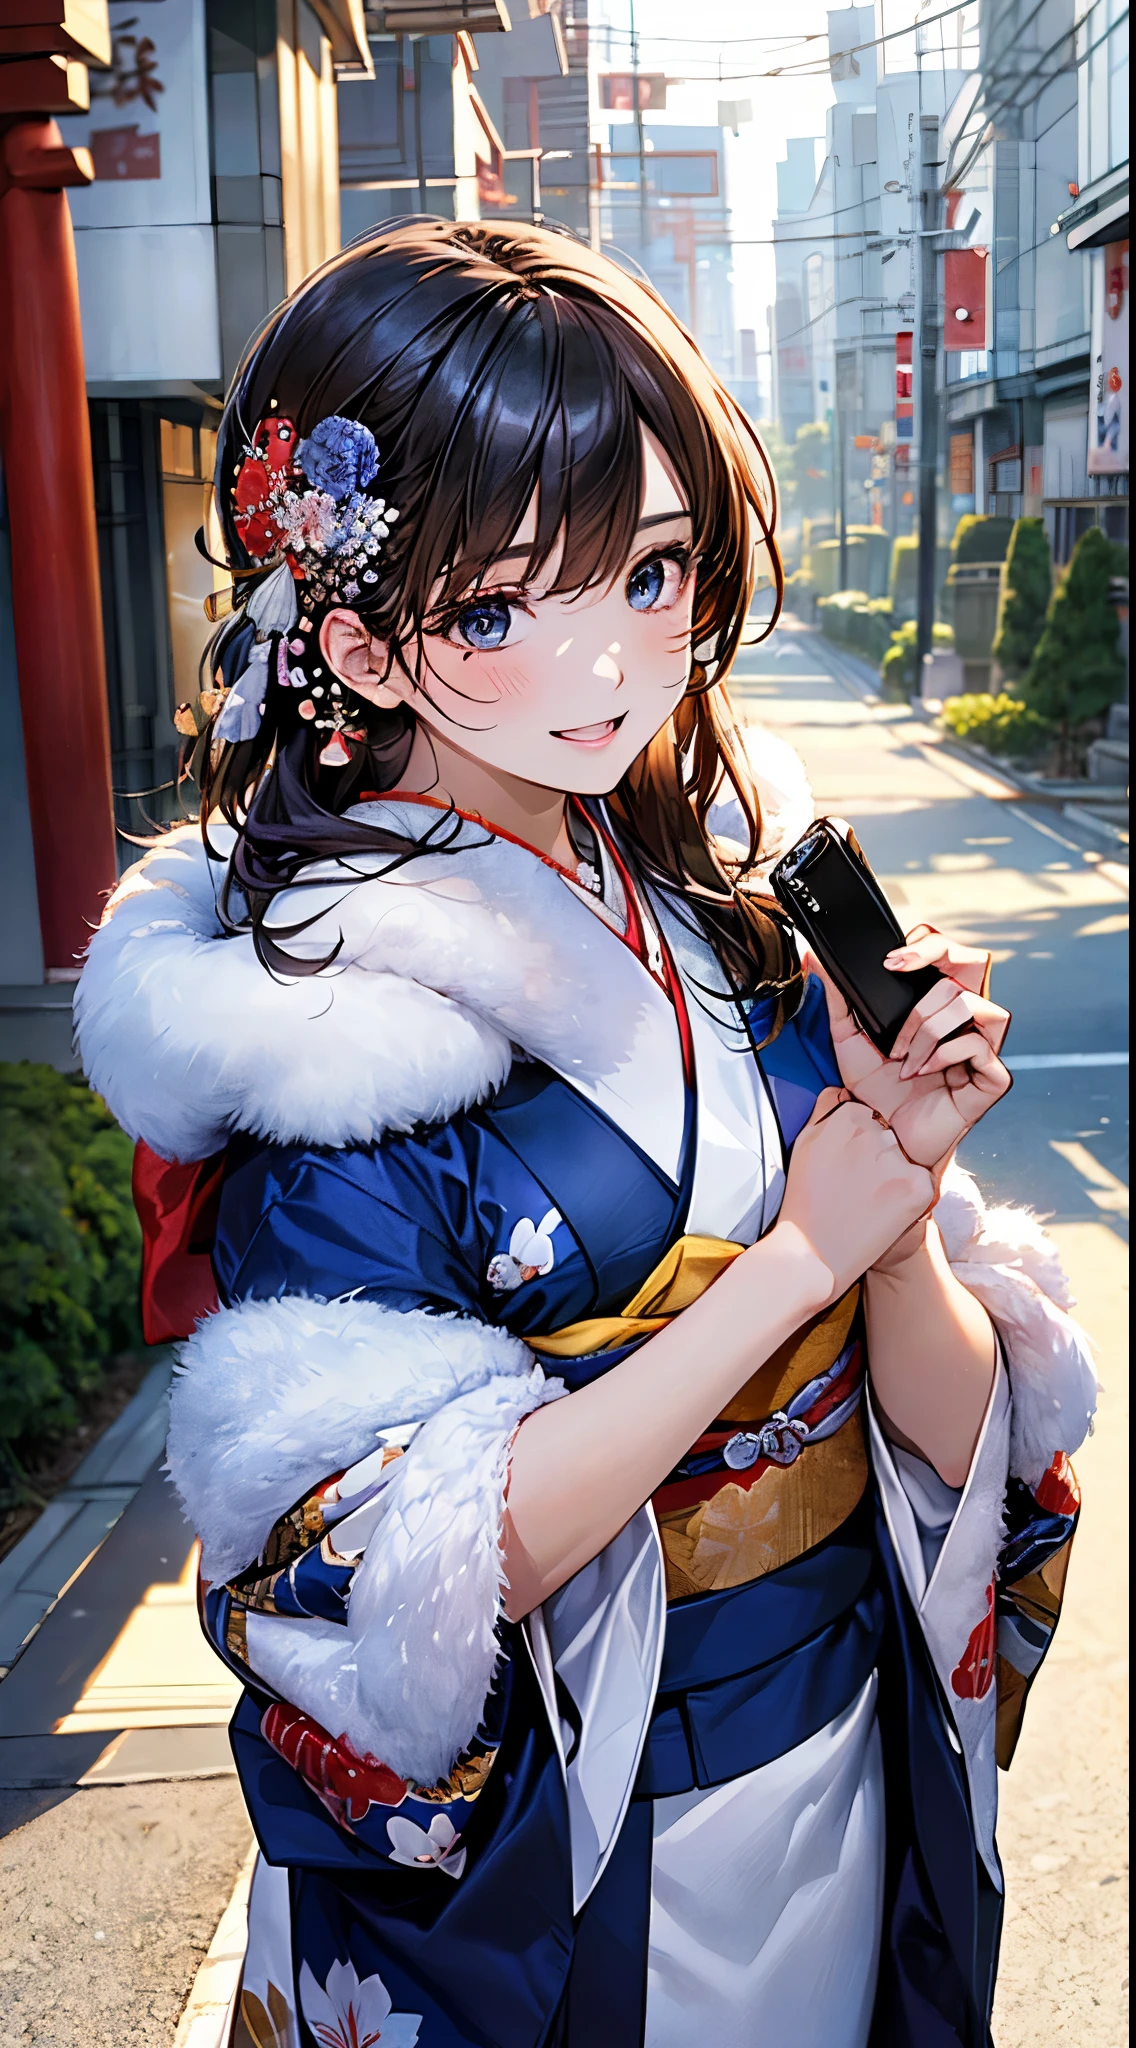 ((perfect anatomy, anatomically correct, super detailed skin)), 
1 girl, japanese, high school girl, shiny skin, large breasts:0.5, looking up, watching the view, 
beautiful hair, beautiful face, beautiful detailed eyes, (middle hair:1.5, japanese hair:1.5), black hair, blue eyes, babyface, mole under eye, 
(((dark blue kimono, luxury floral kimono, fur muffler), hair ornament)), 
((smile:1.5, open your mouth wide)), walking, holding a phone, holding a drawstring, 
(beautiful scenery), winter, dawn, (new year's day, first visit), hokkaido, sapporo, outside hokkaido shrine, crowd, snow, snowfall:1.5, freezing weather, frost, 
(8k, top-quality, masterpiece​:1.2, extremely detailed), (photorealistic), beautiful art, visual art, depth of fields, natural lighting,